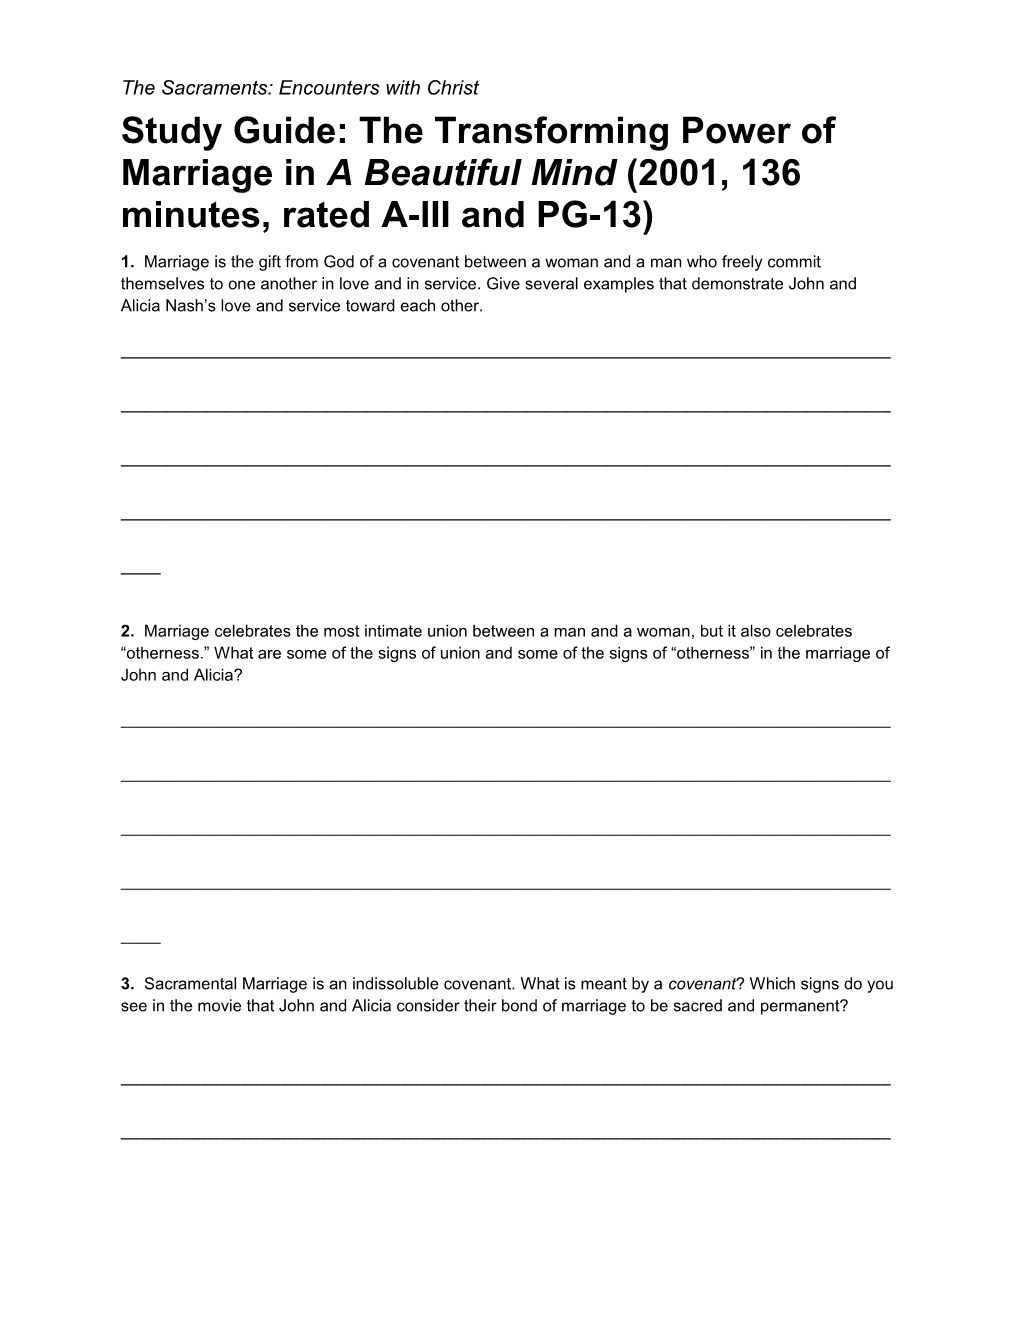 Study Guide: the Transforming Power of Marriage in a Beautiful Mind Page 2